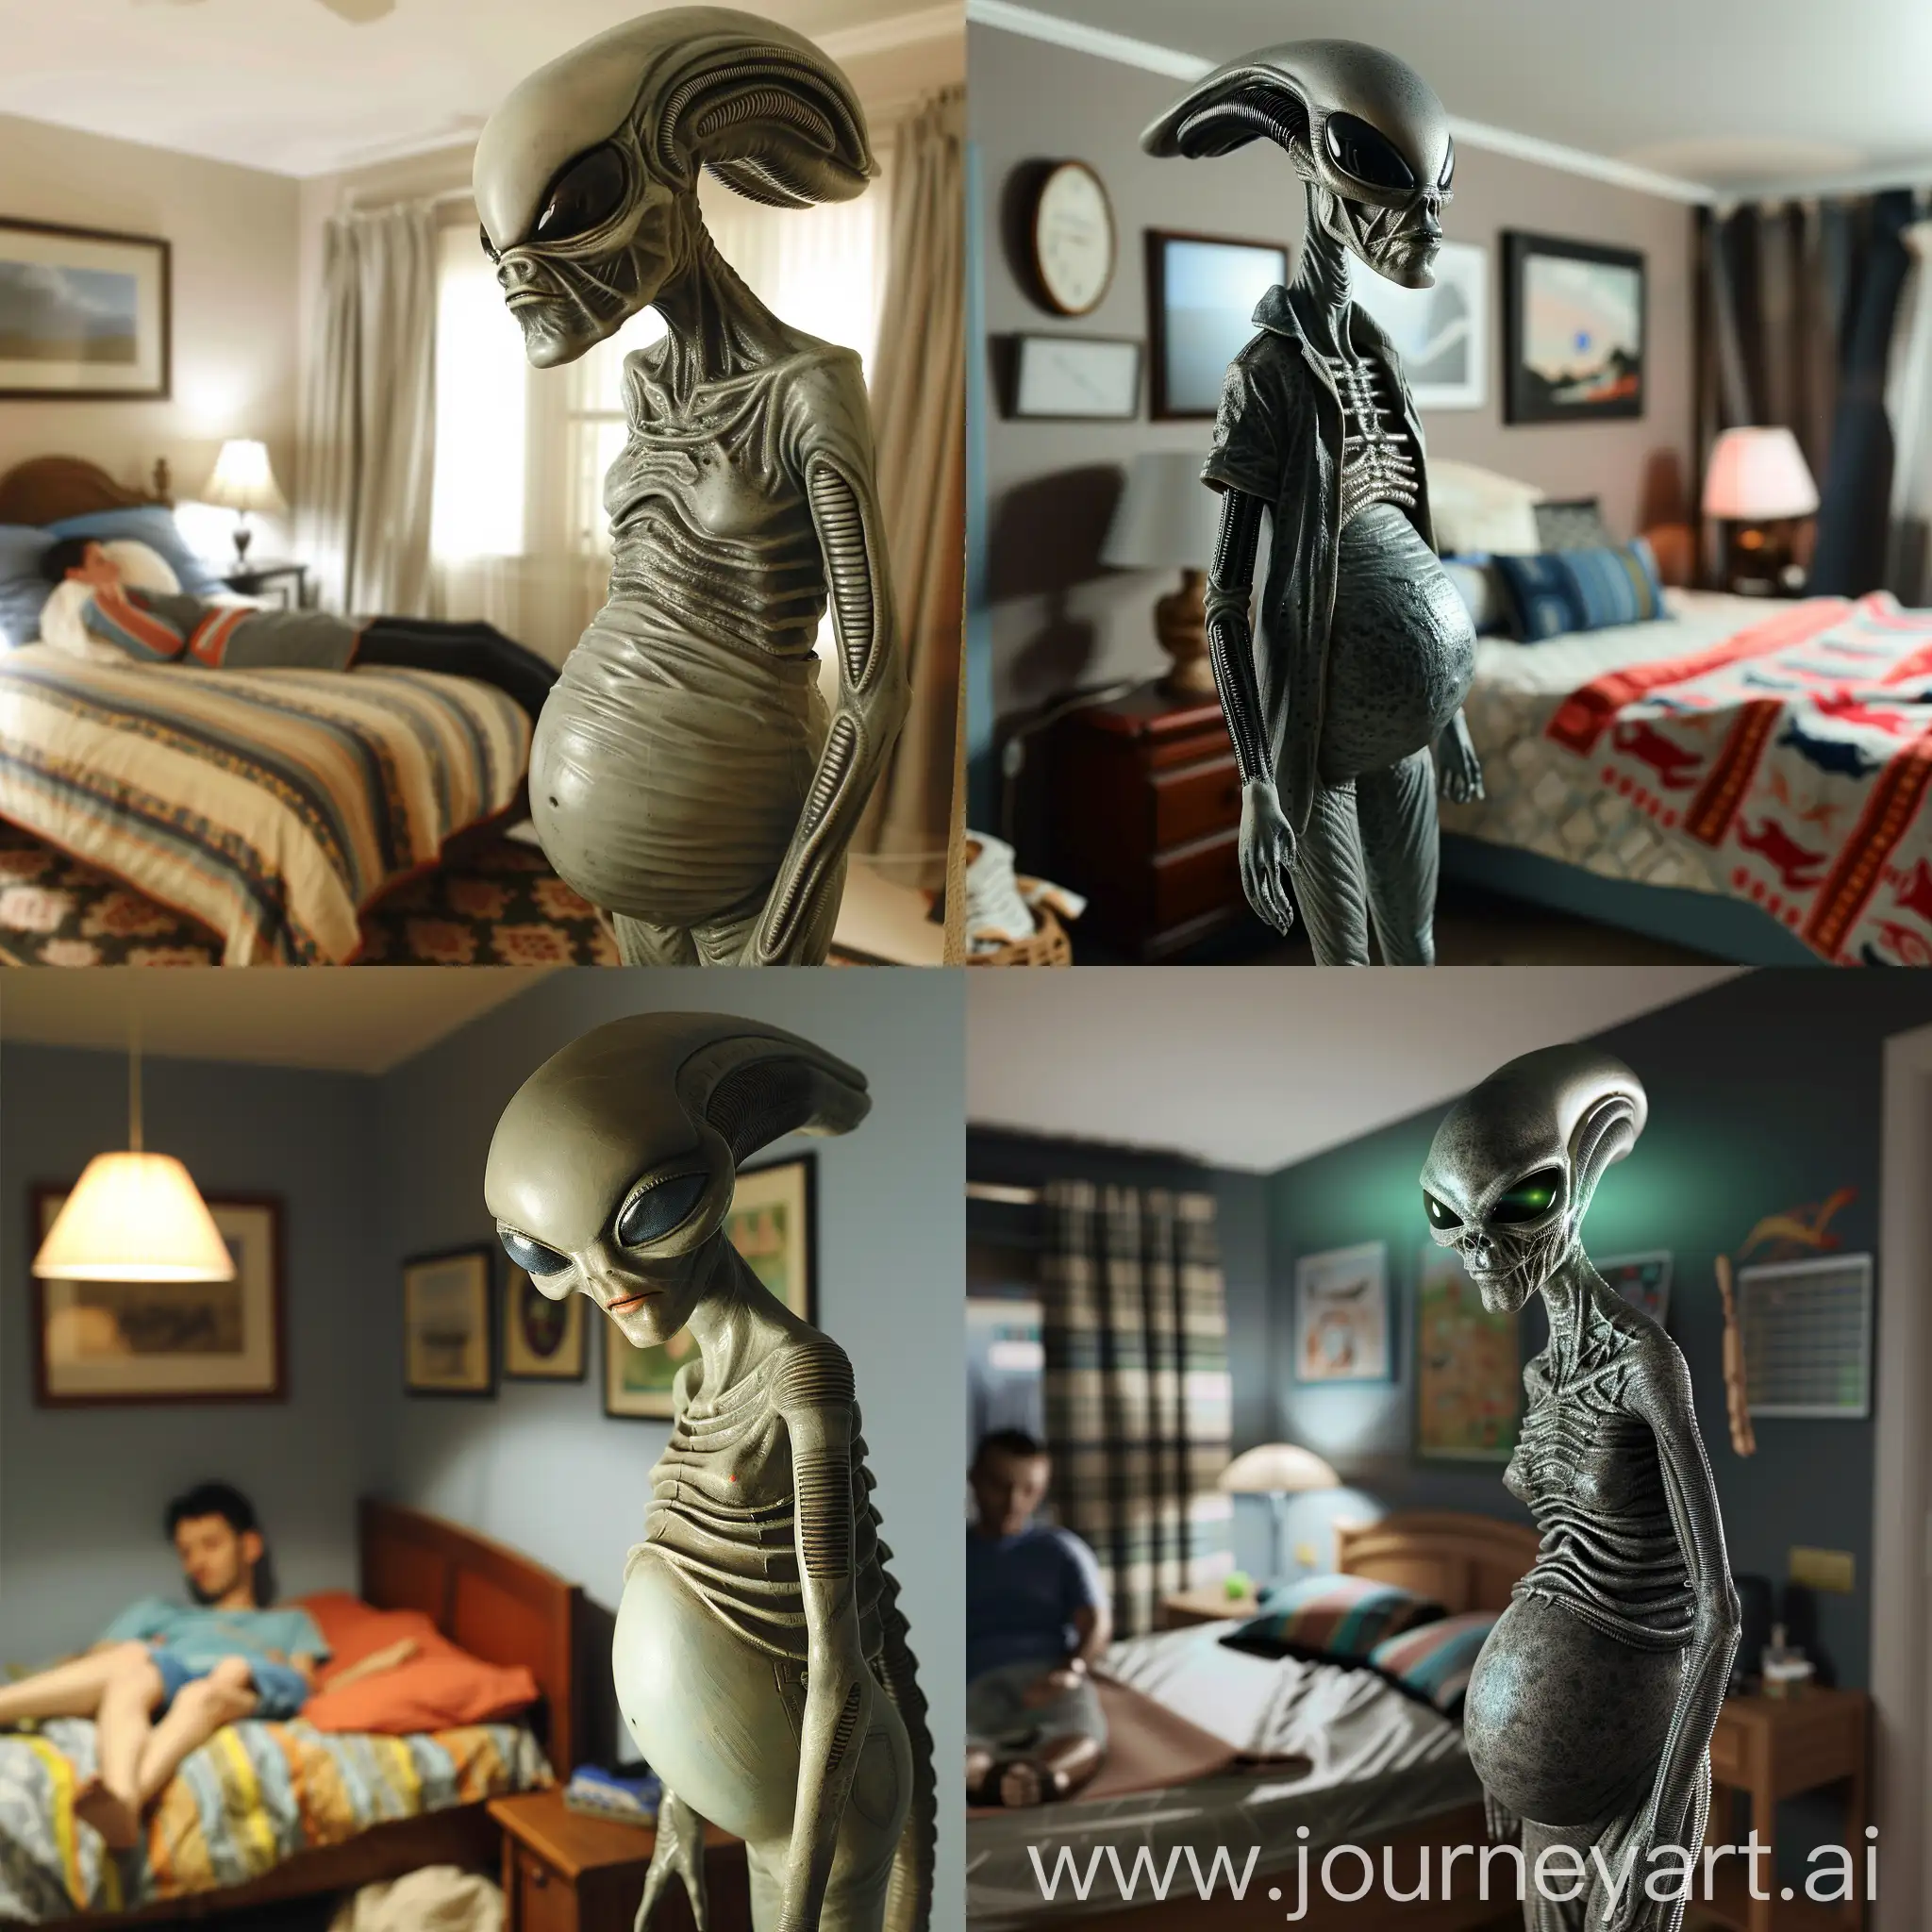 Towering-Pregnant-Alien-Observing-Human-in-Bedroom-at-Night